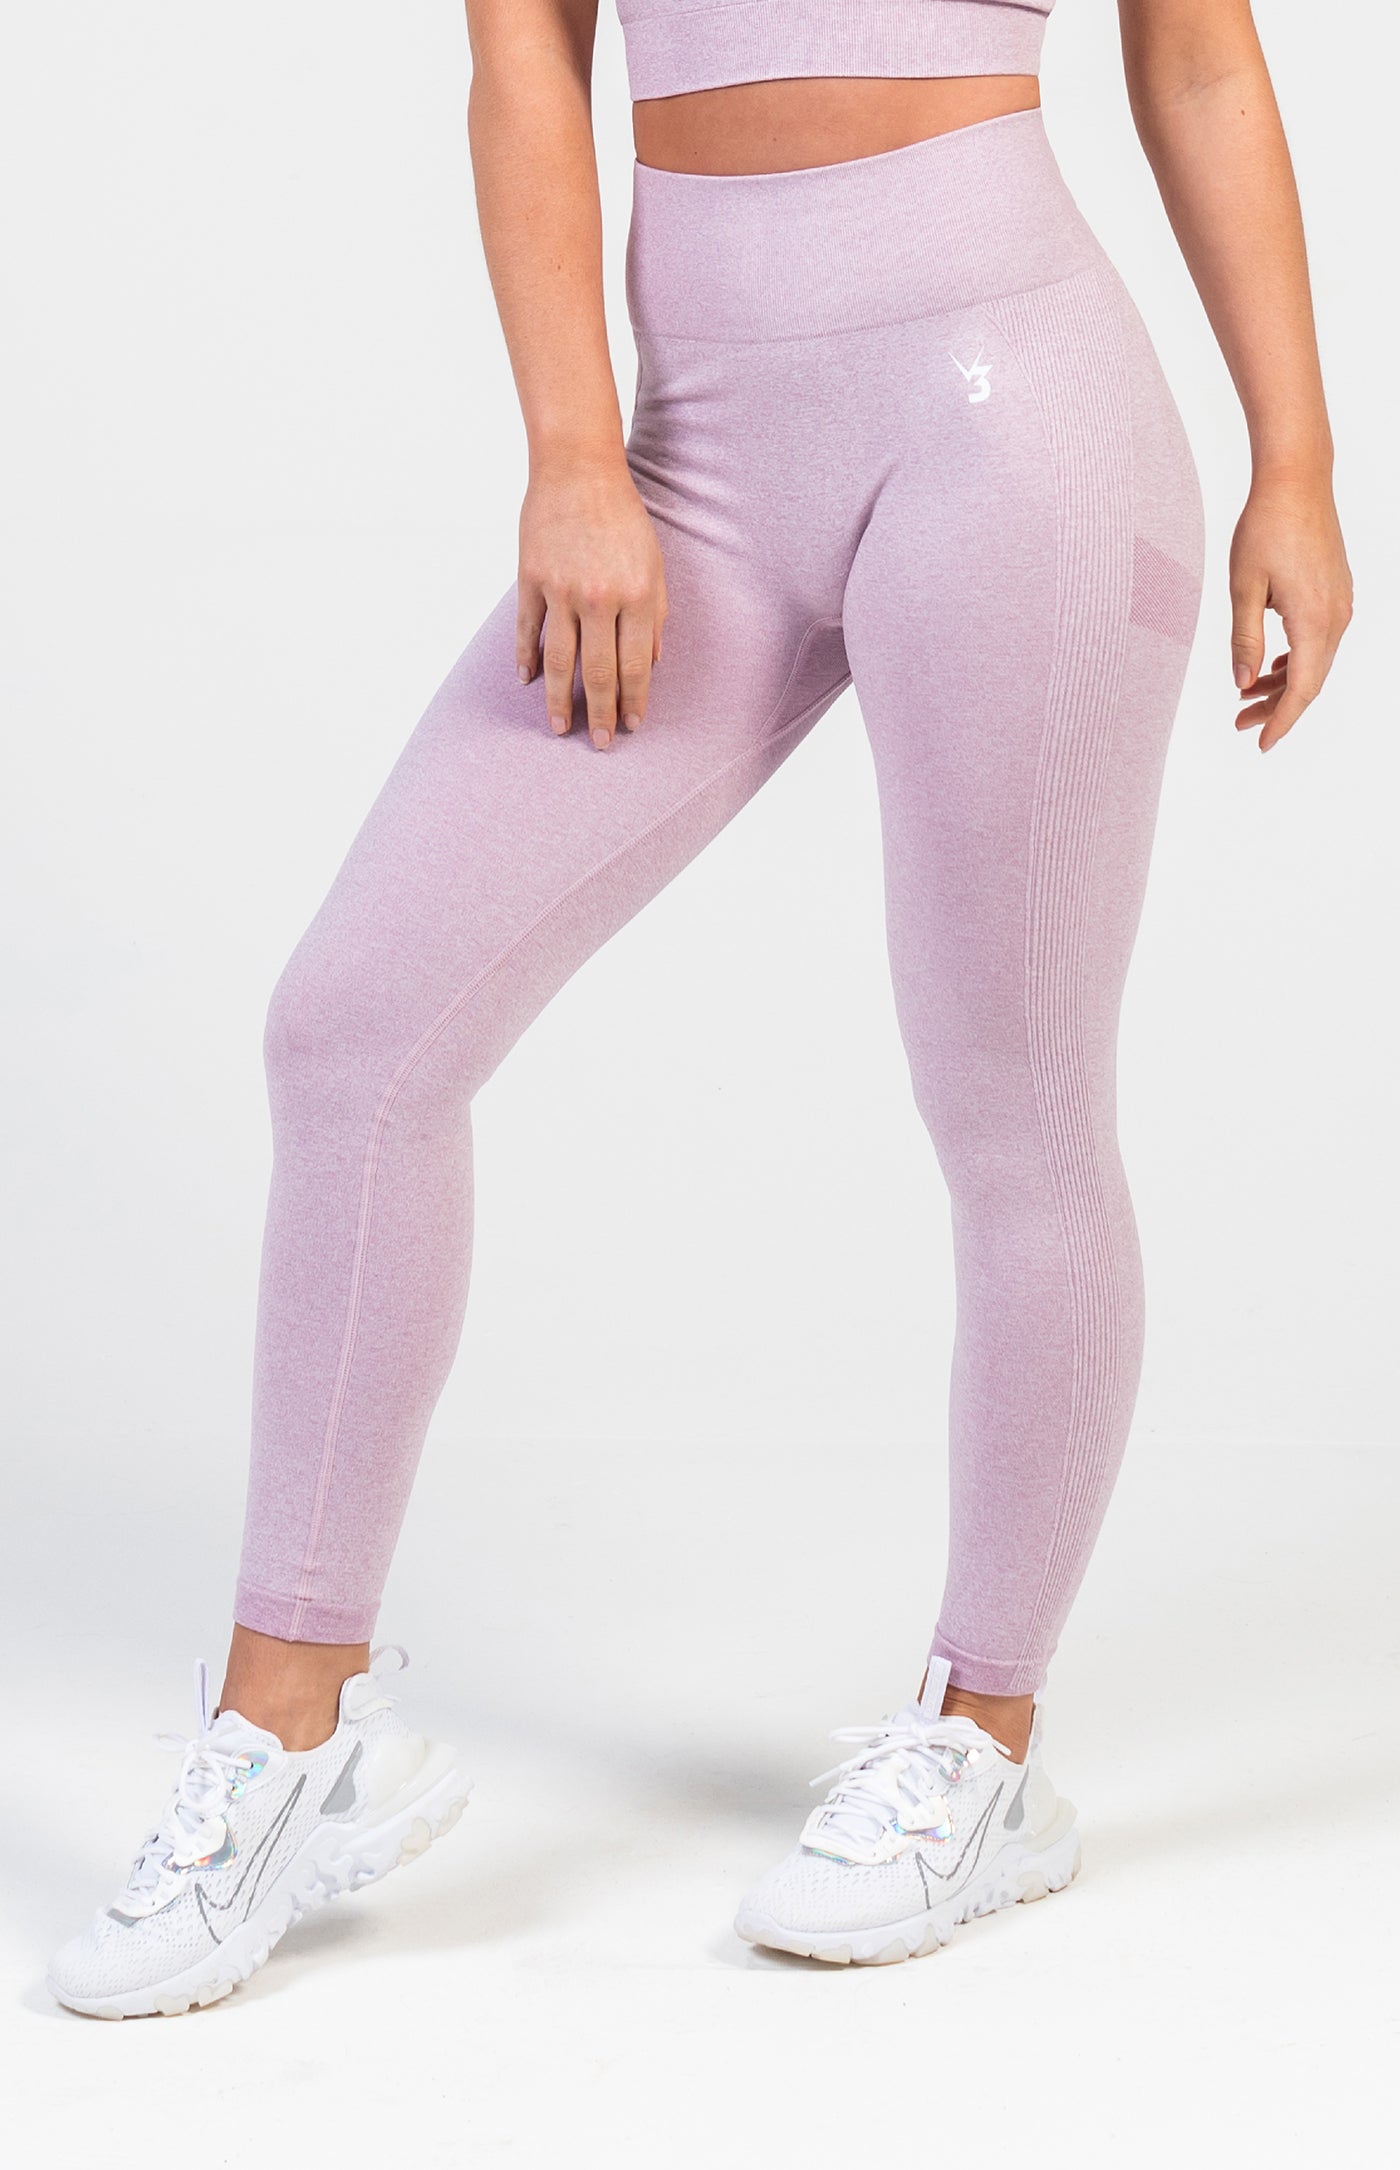 redbaysand Women's Define seamless scrunch bum shaping high waisted leggings in lilac purple – Squat proof sports tights for Gym workouts training, Running, yoga, bodybuilding and bikini fitness.